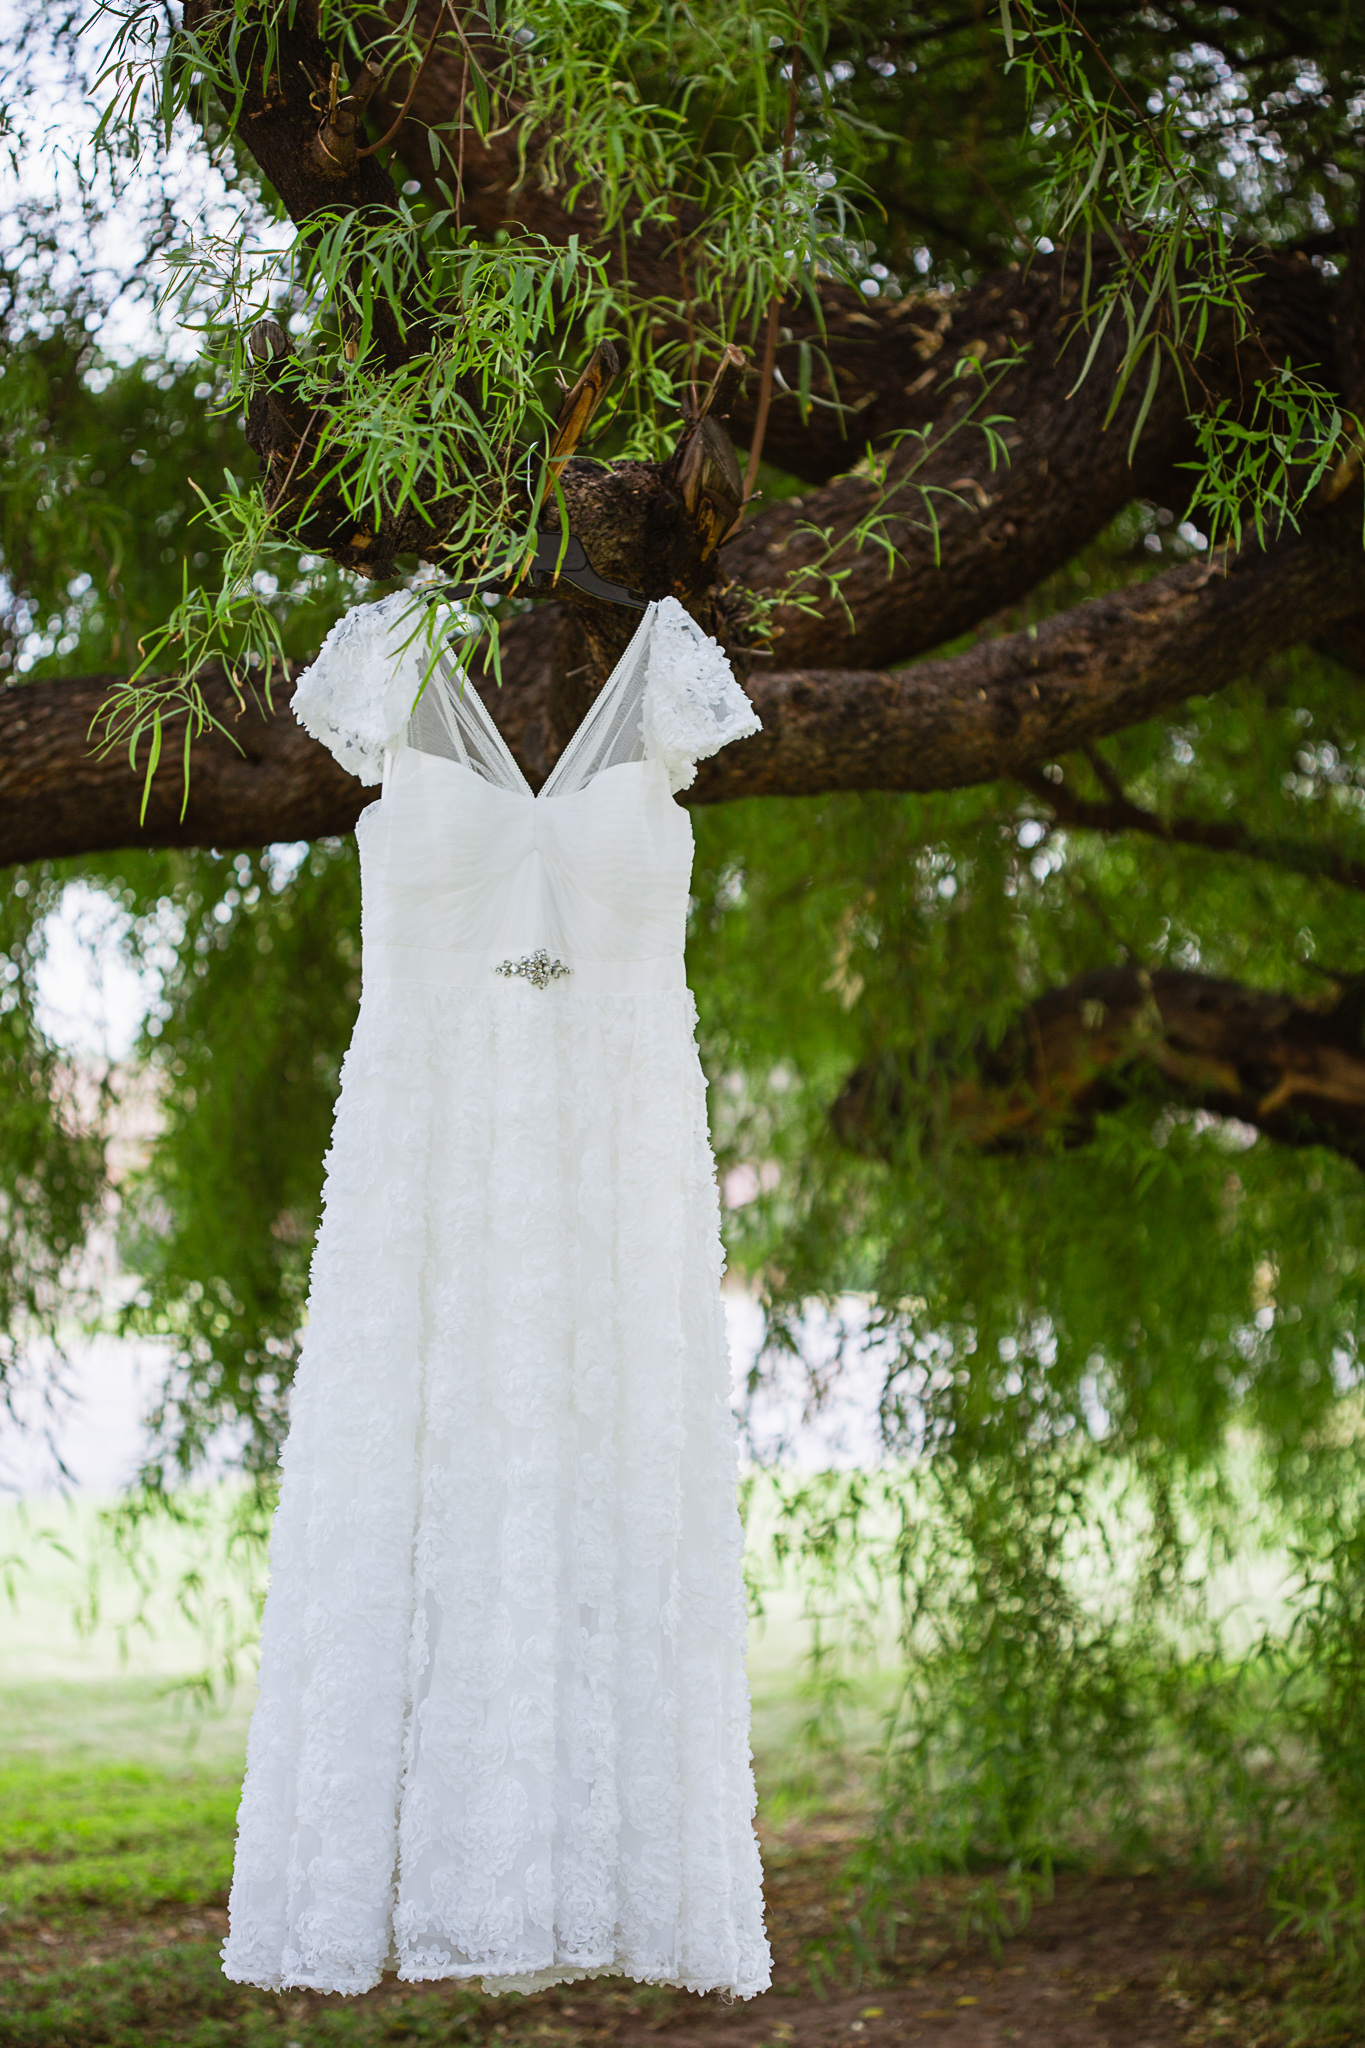 Simple wedding dress with roses hanging from a tree by PMA Photography.